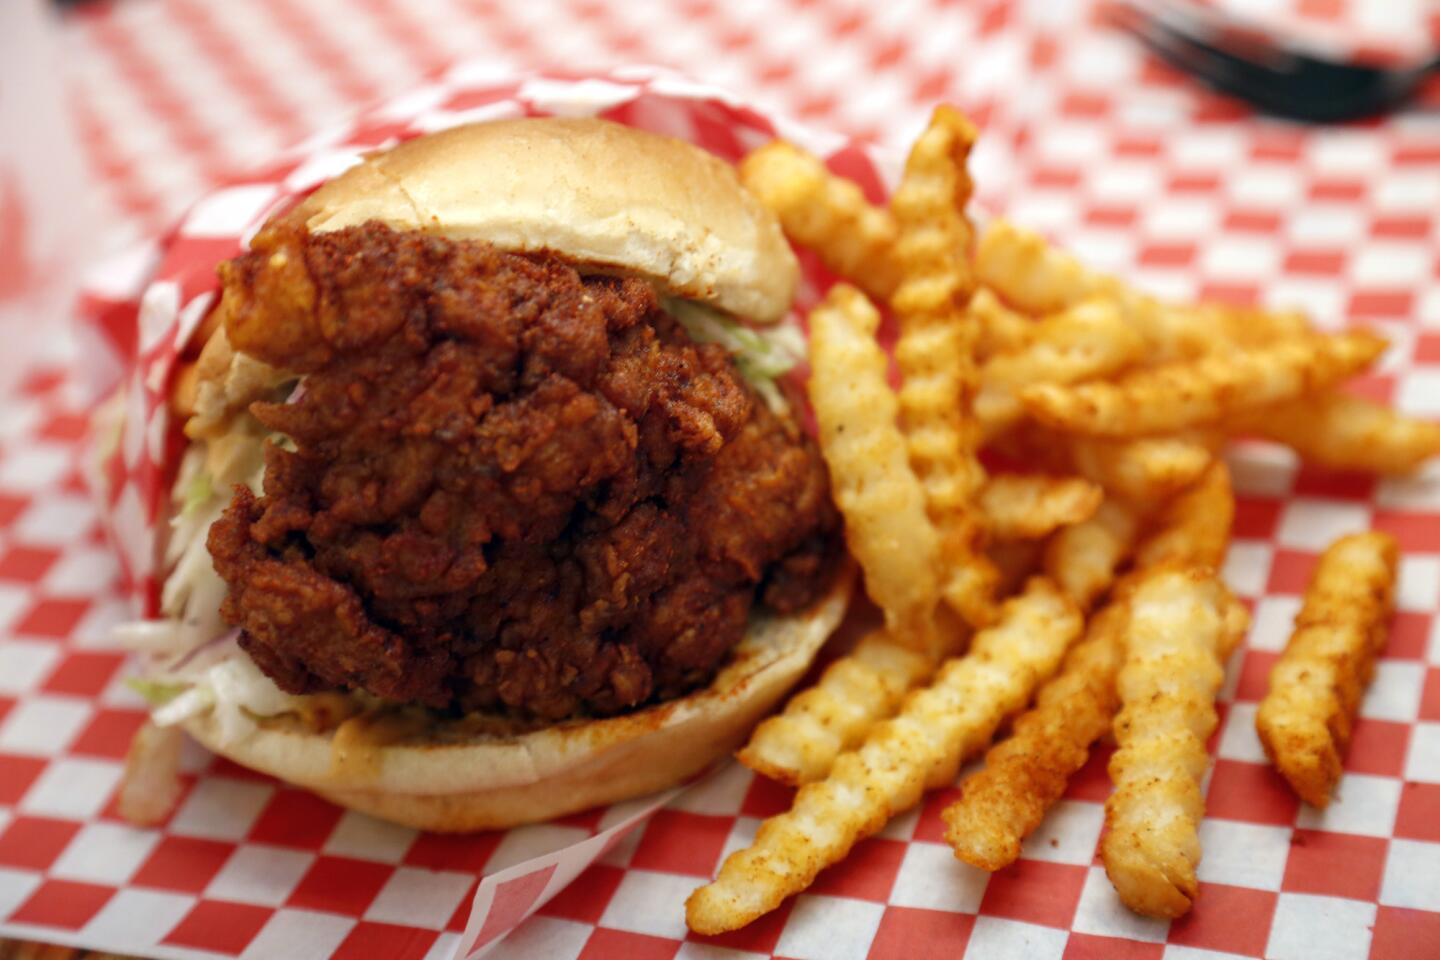 The country fried chicken sandwich is on the menu at Howlin' Ray's hot chicken located inside the Far East Plaza in Chinatown in Los Angeles.